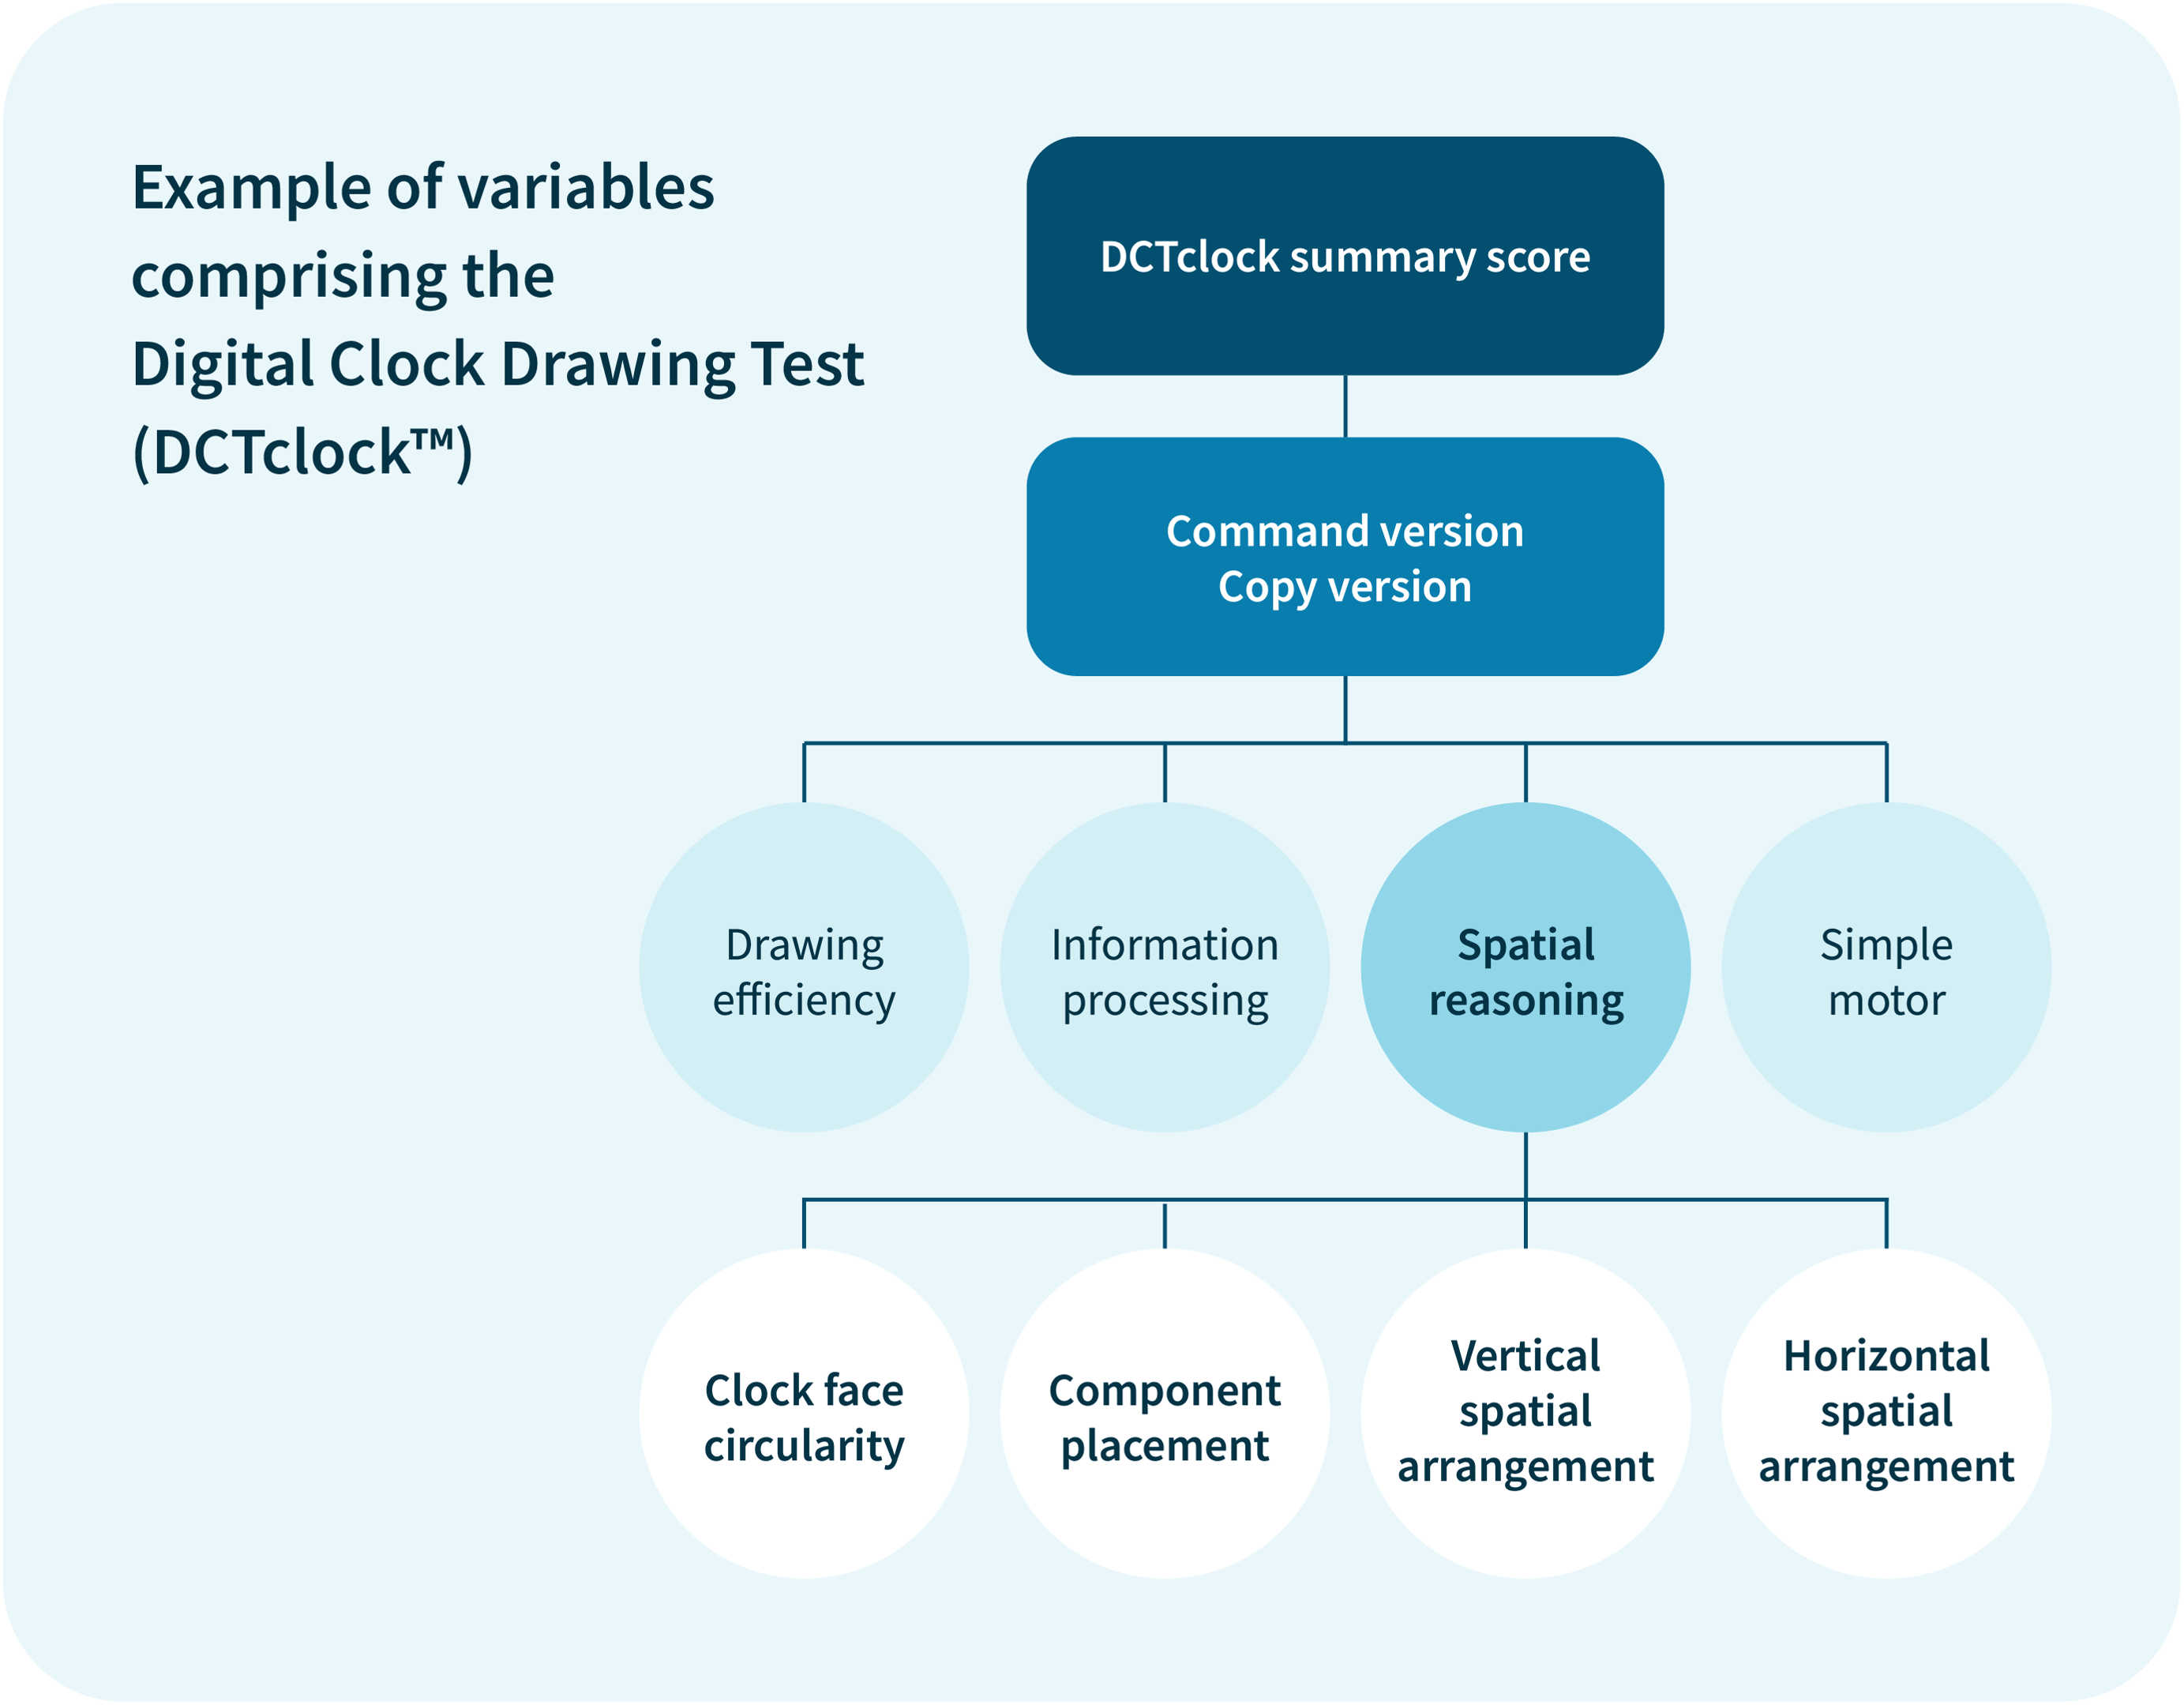 The Digital Clock and Recall test evaluates the key cognitive function areas and translates those scores into a simplified score to ensure providers have an efficient method of intervening in a potential cognitive impairment. Digital Cognitive Assessments provide greater sensitivity over traditional paper-based cognitive tests like the MMSE, MOCA, and Mini-Cog